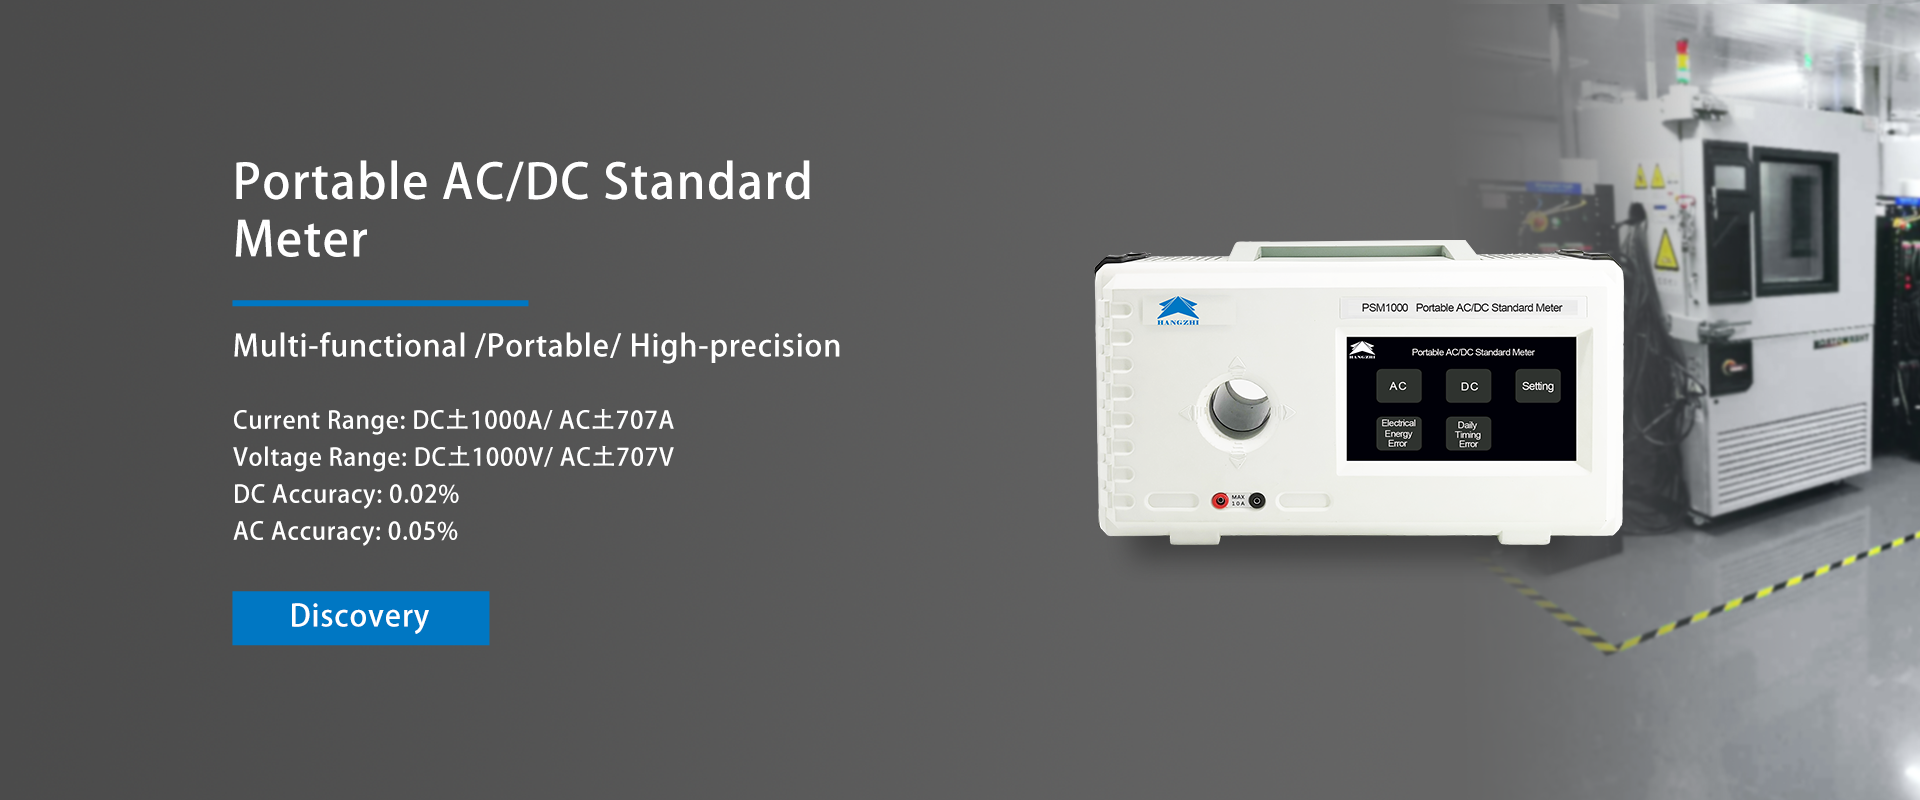 Portable AC and DC standard meter